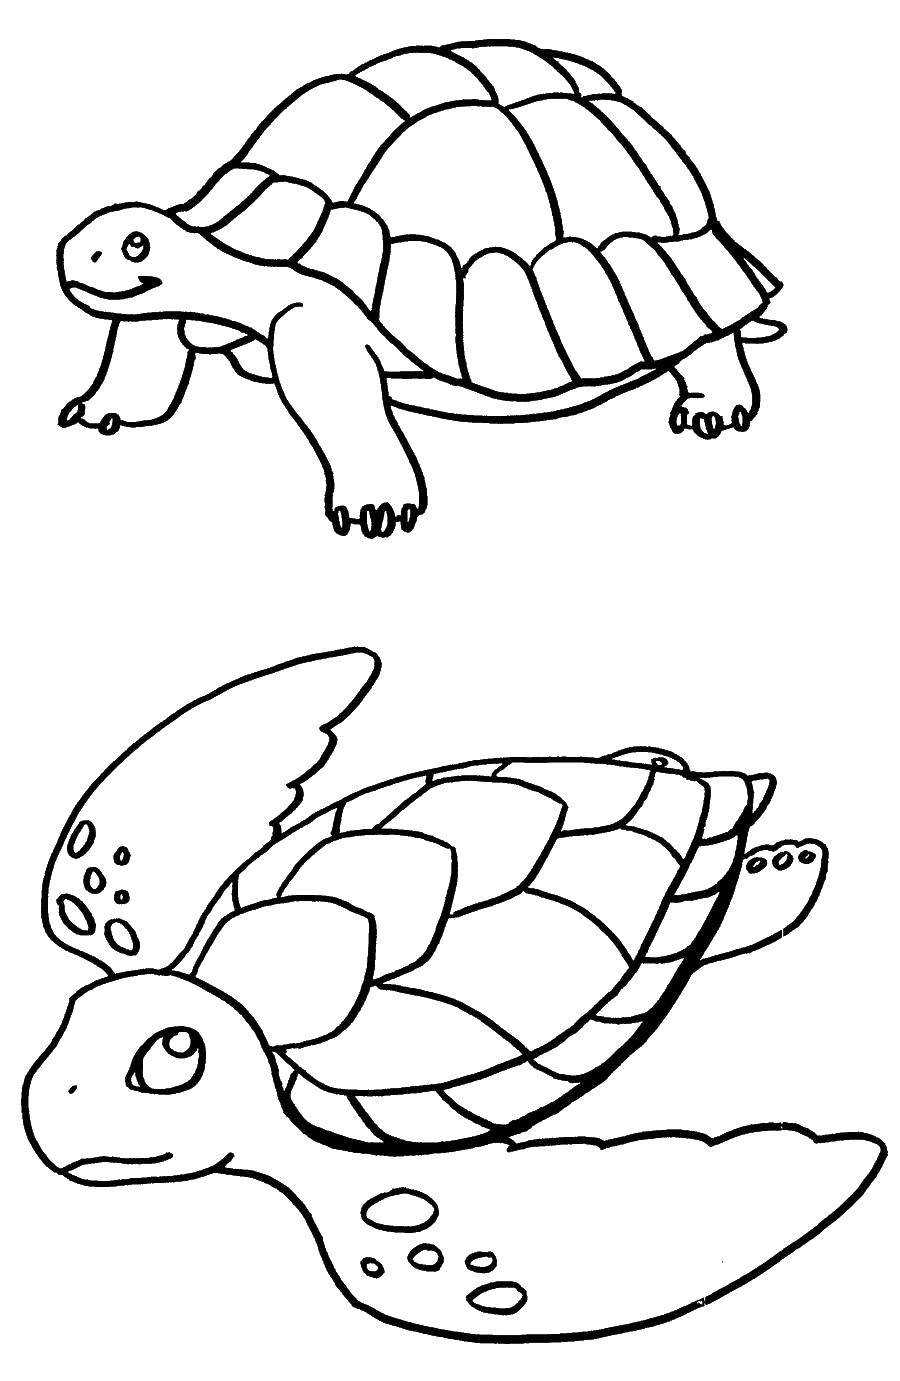 Coloring Land and sea turtles. Category reptiles. Tags:  Reptile, turtle.